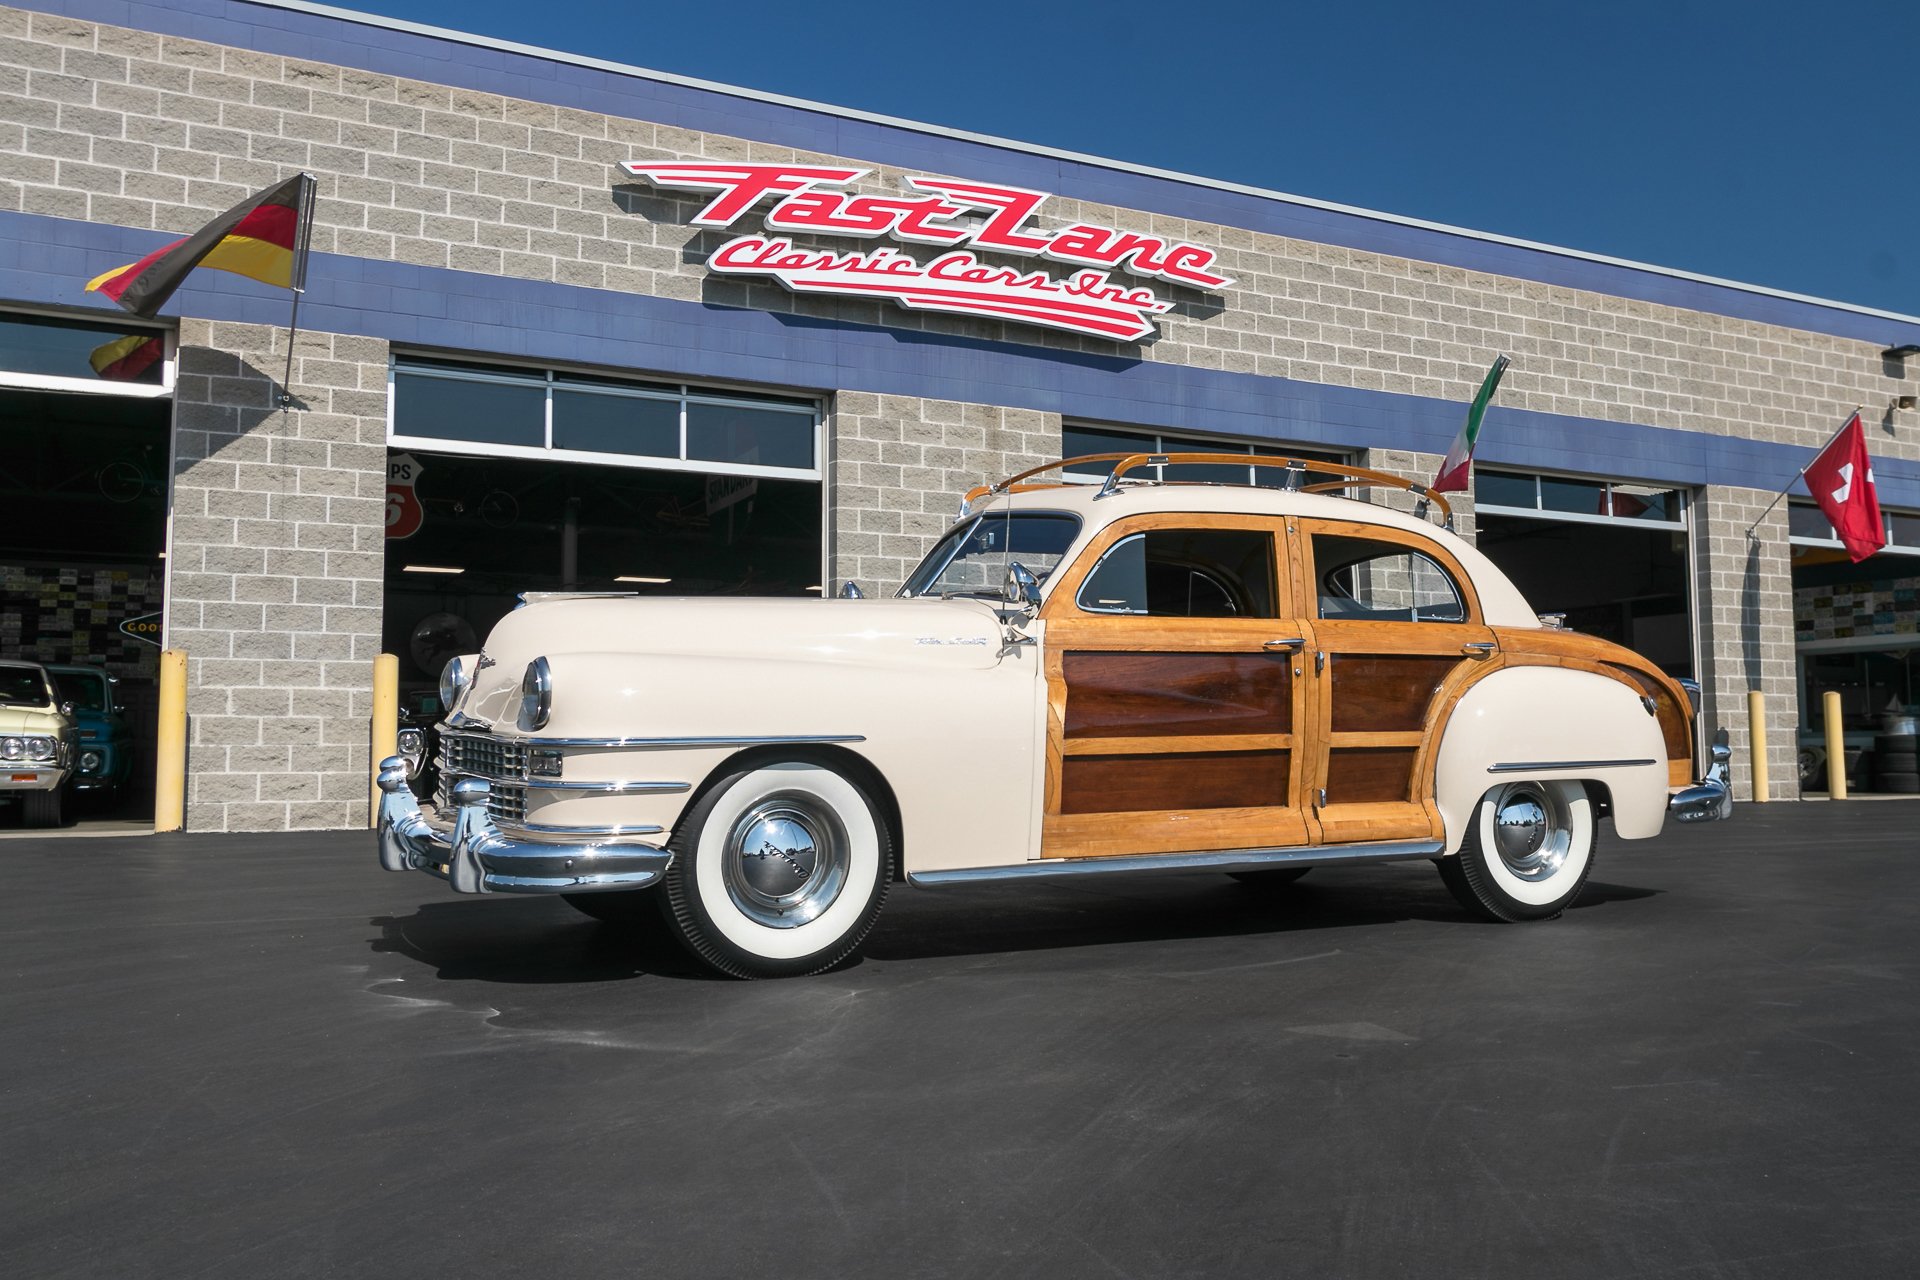 1947 chrysler town and country